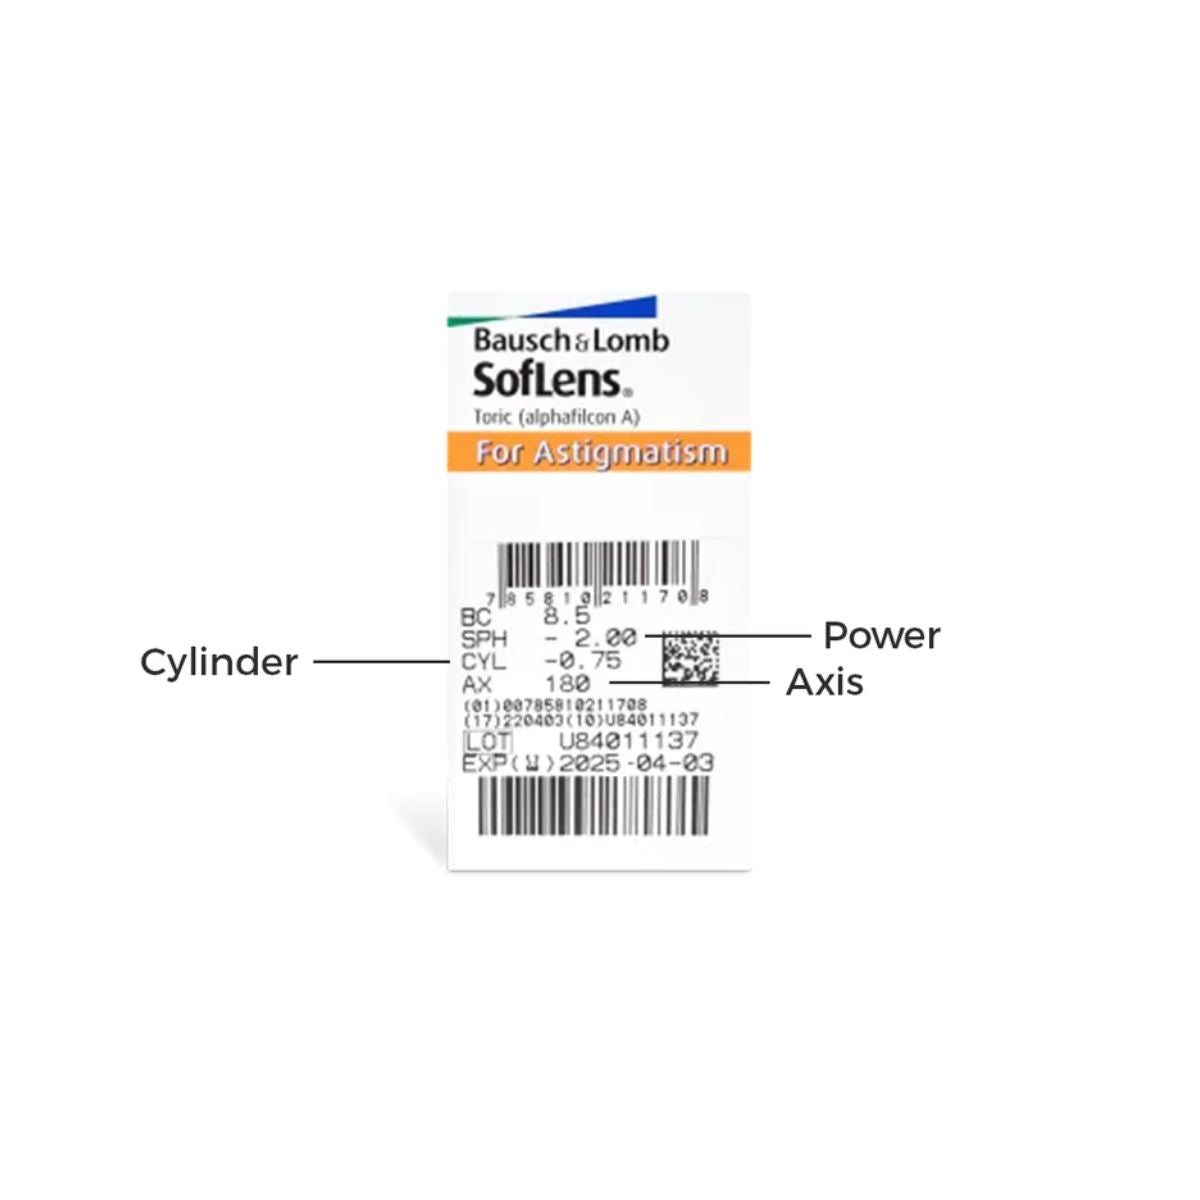 "SofLens Toric Monthly Disposable Contact Lenses for Astigmatism 6 Pack"